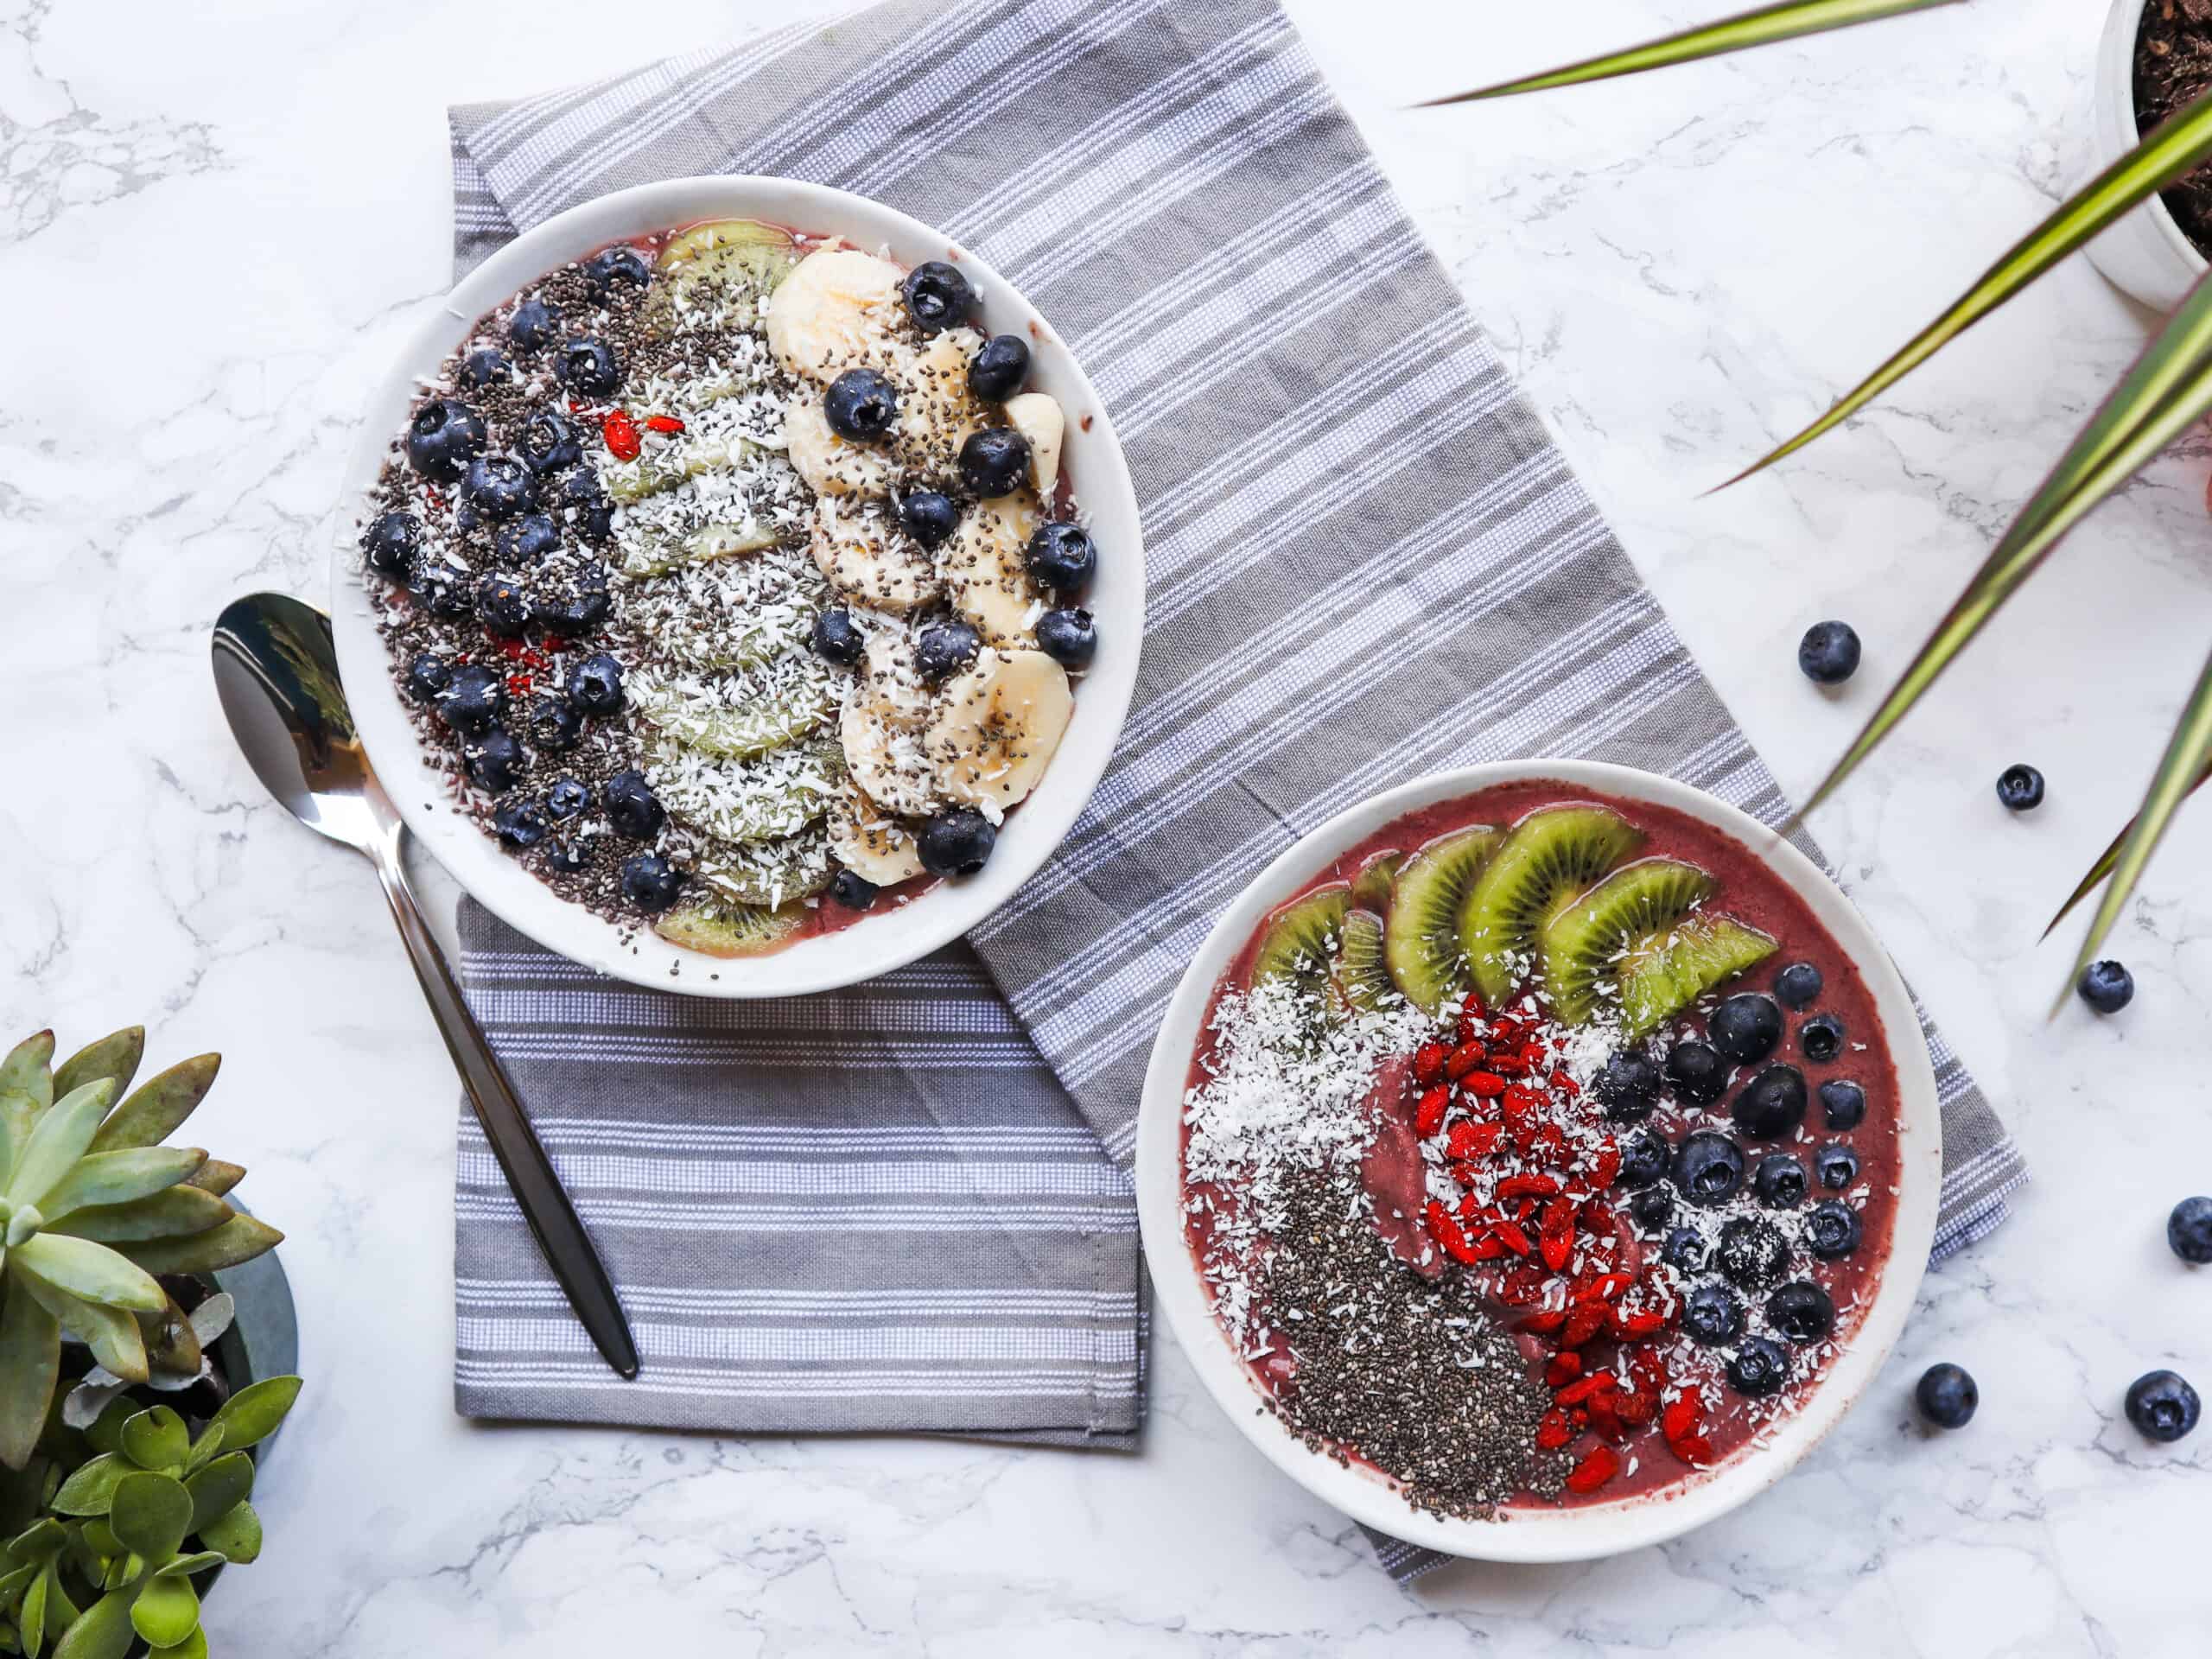 What are the benefits of eating an acai bowl